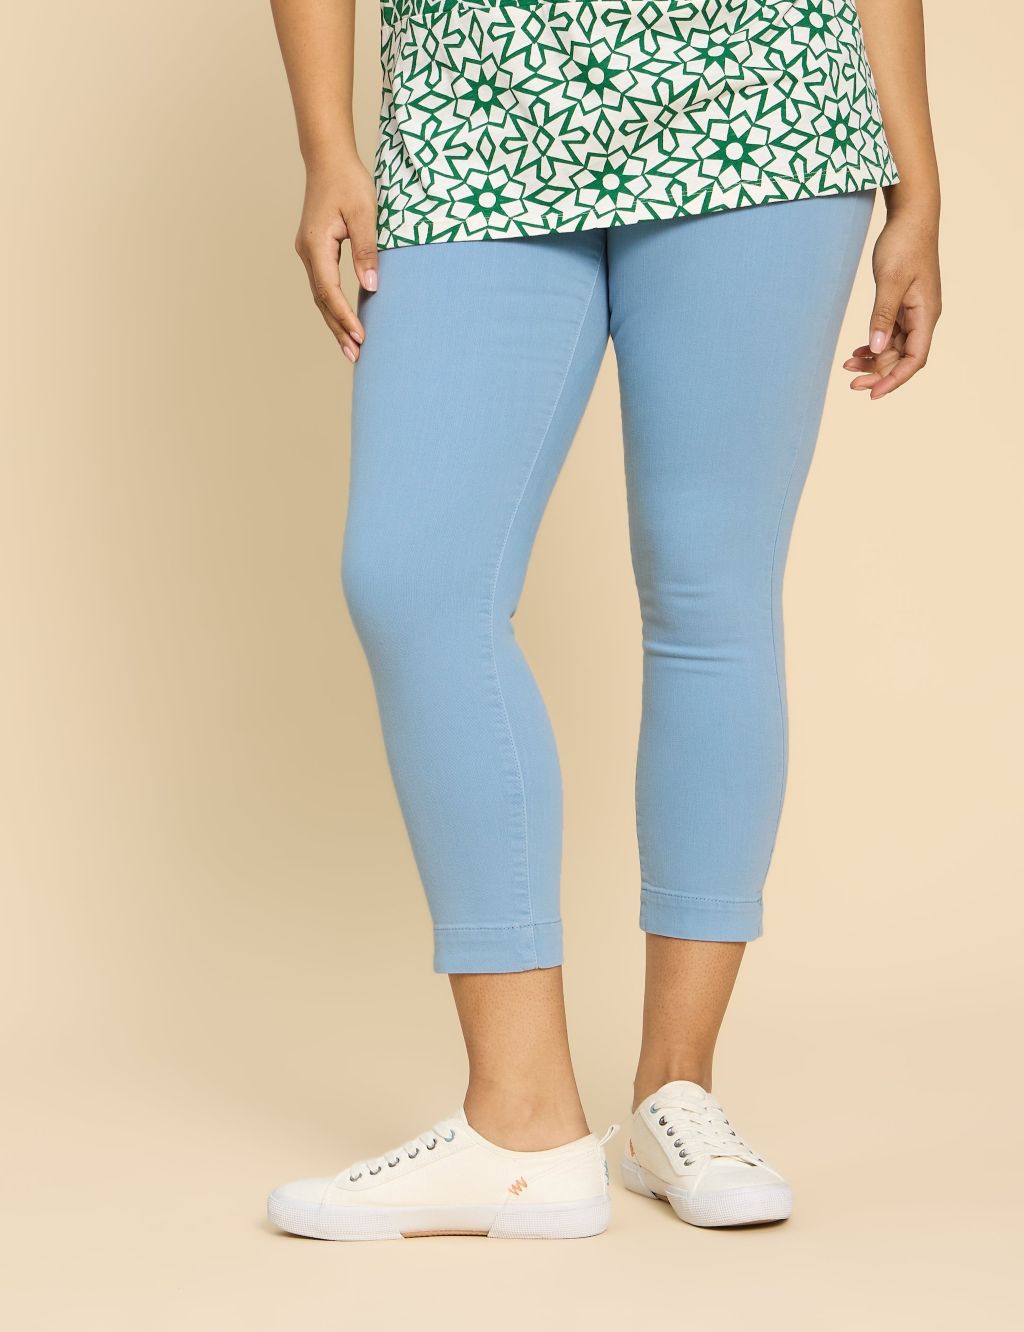 Cropped Jeggings